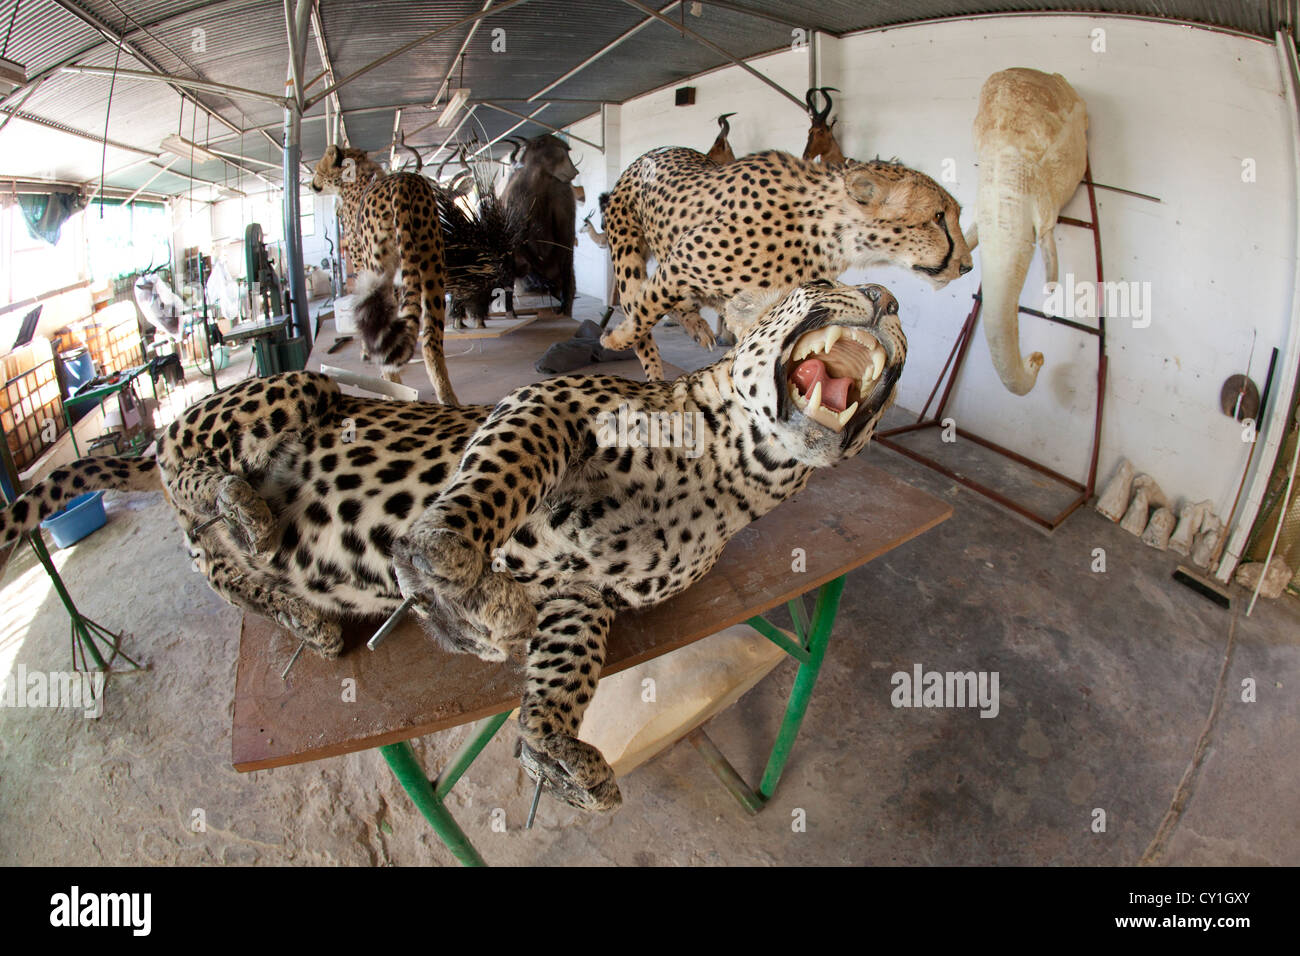 taxidermy. Hunters from US and Germany shoot wildlife and stuff it as a trophy in a taxidermy workshop in Namibia. Stock Photo